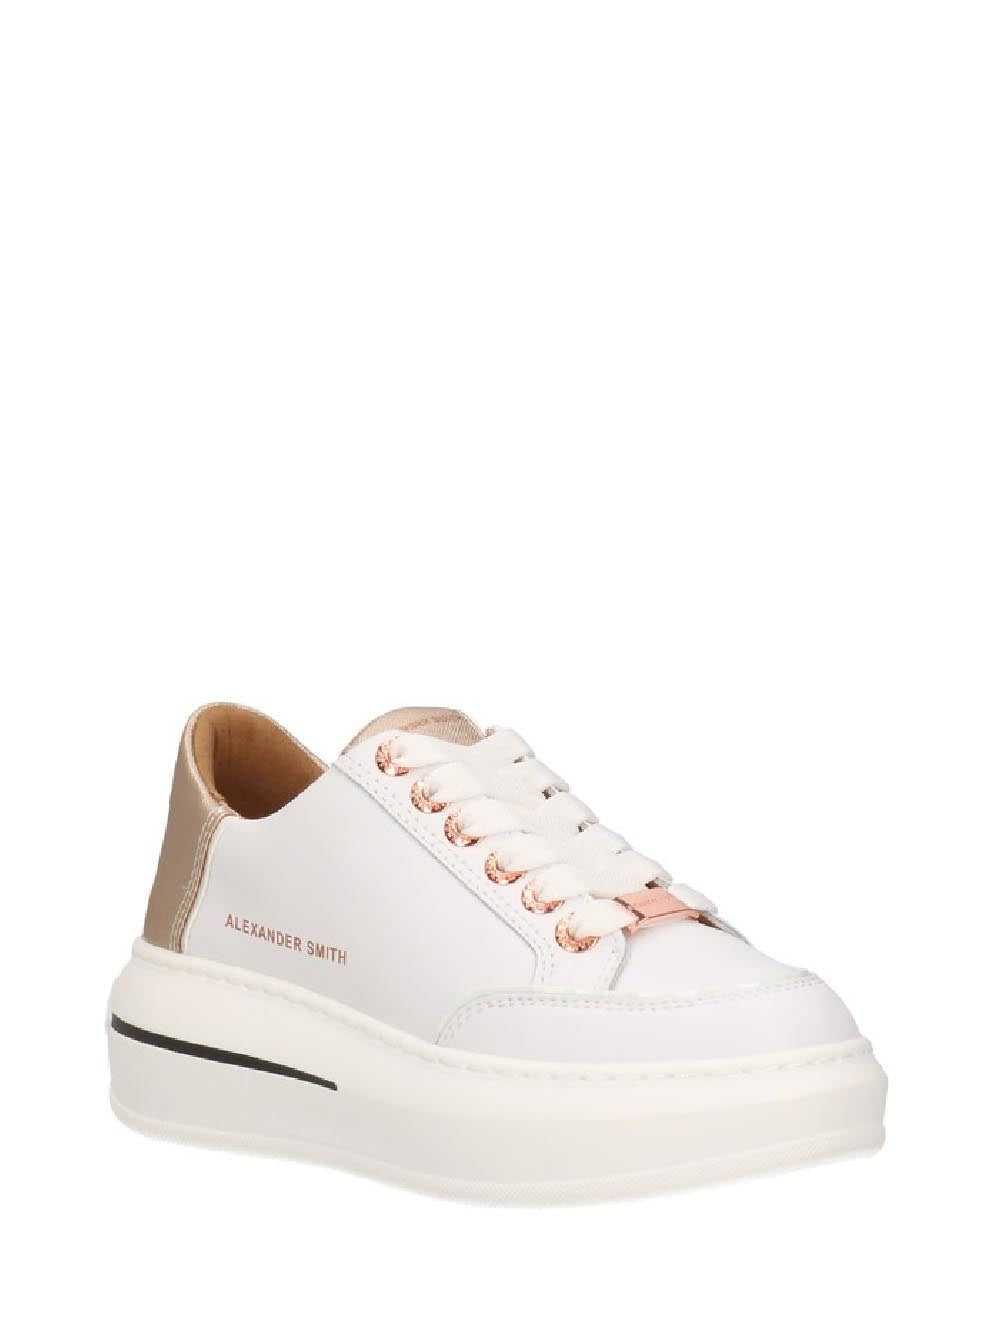 Alexander Smith Sneakers Donna Bianco/Rame